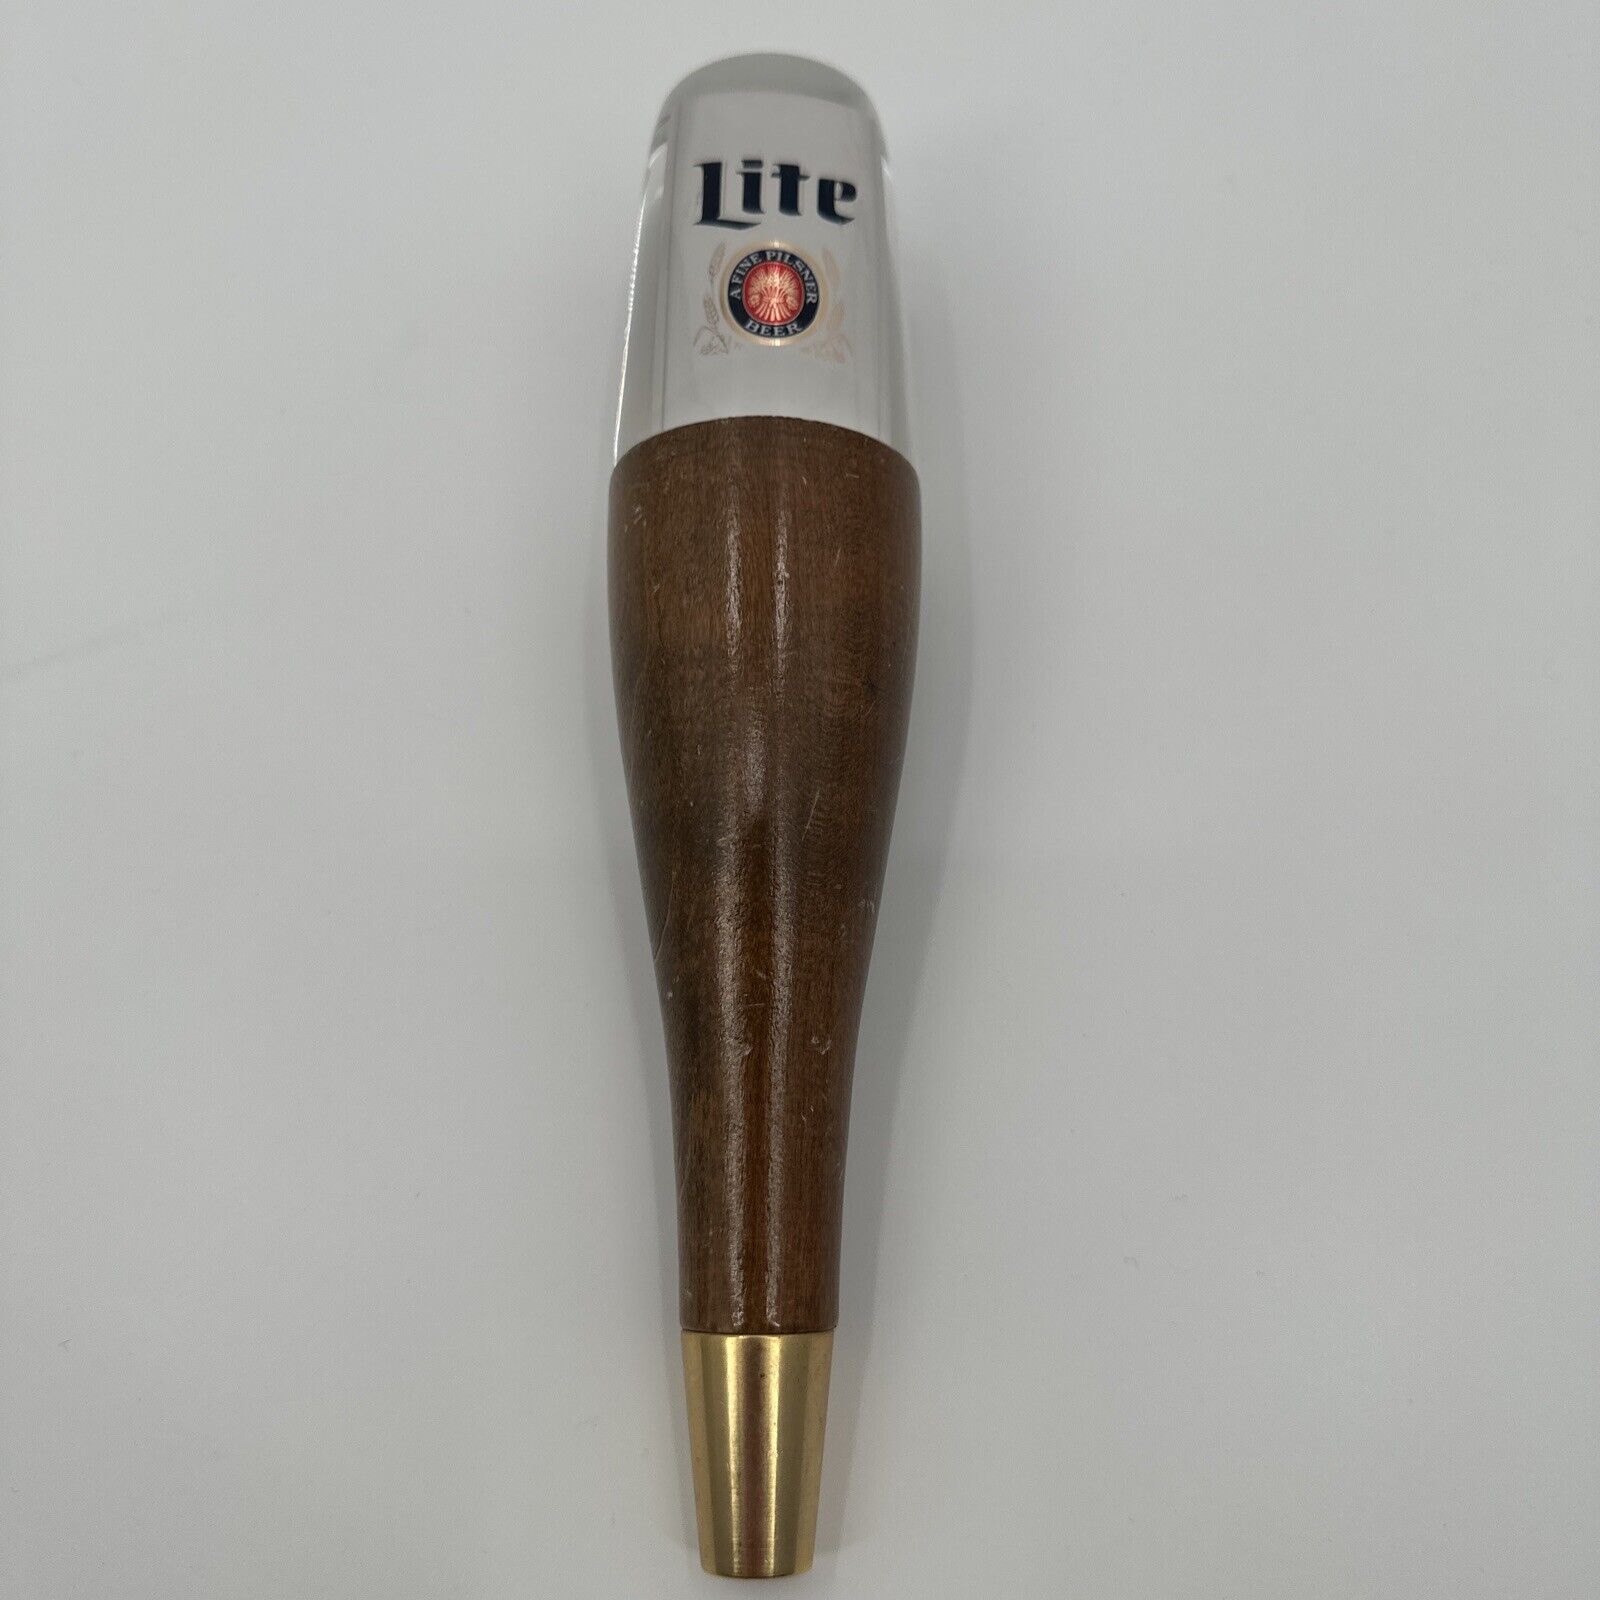 Very Rare Vintage MILLER LITE Wood and Acrylic Beer Tap Handle Pull Man Cave